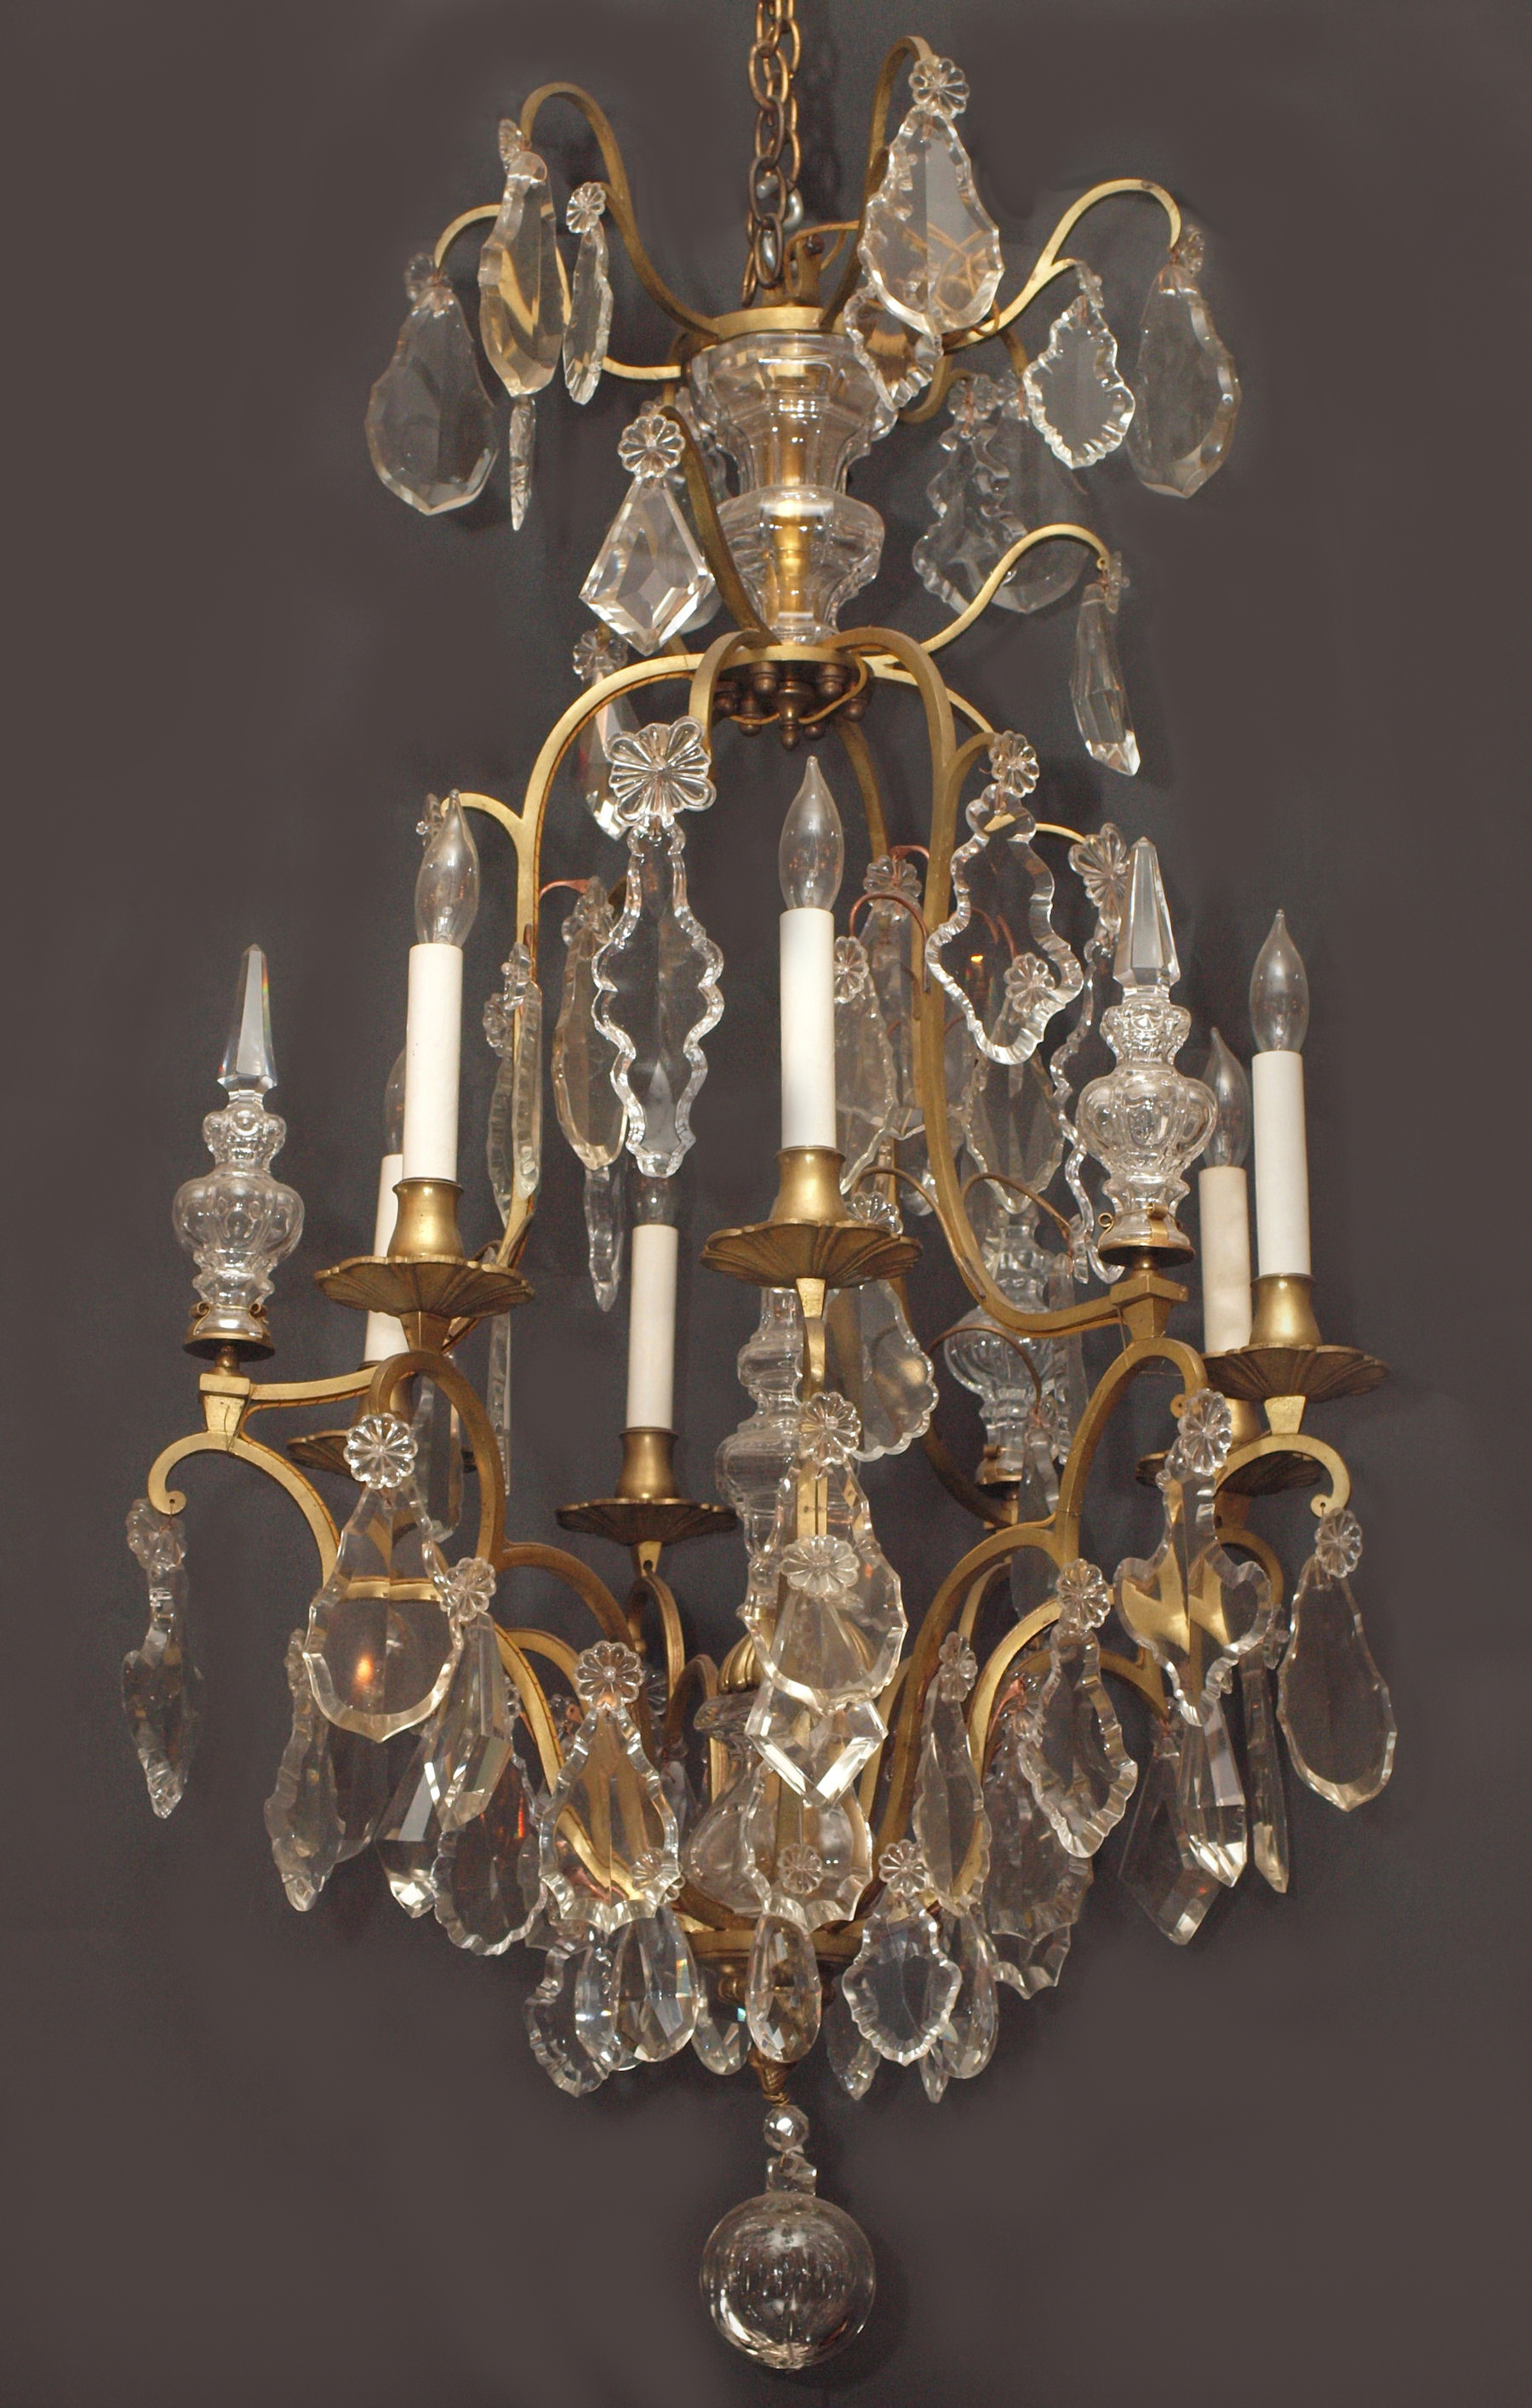 » chandelier For Catalog Lamps orleans Lighting new Chandeliers antique Antique Sale Antique crystal 28  and